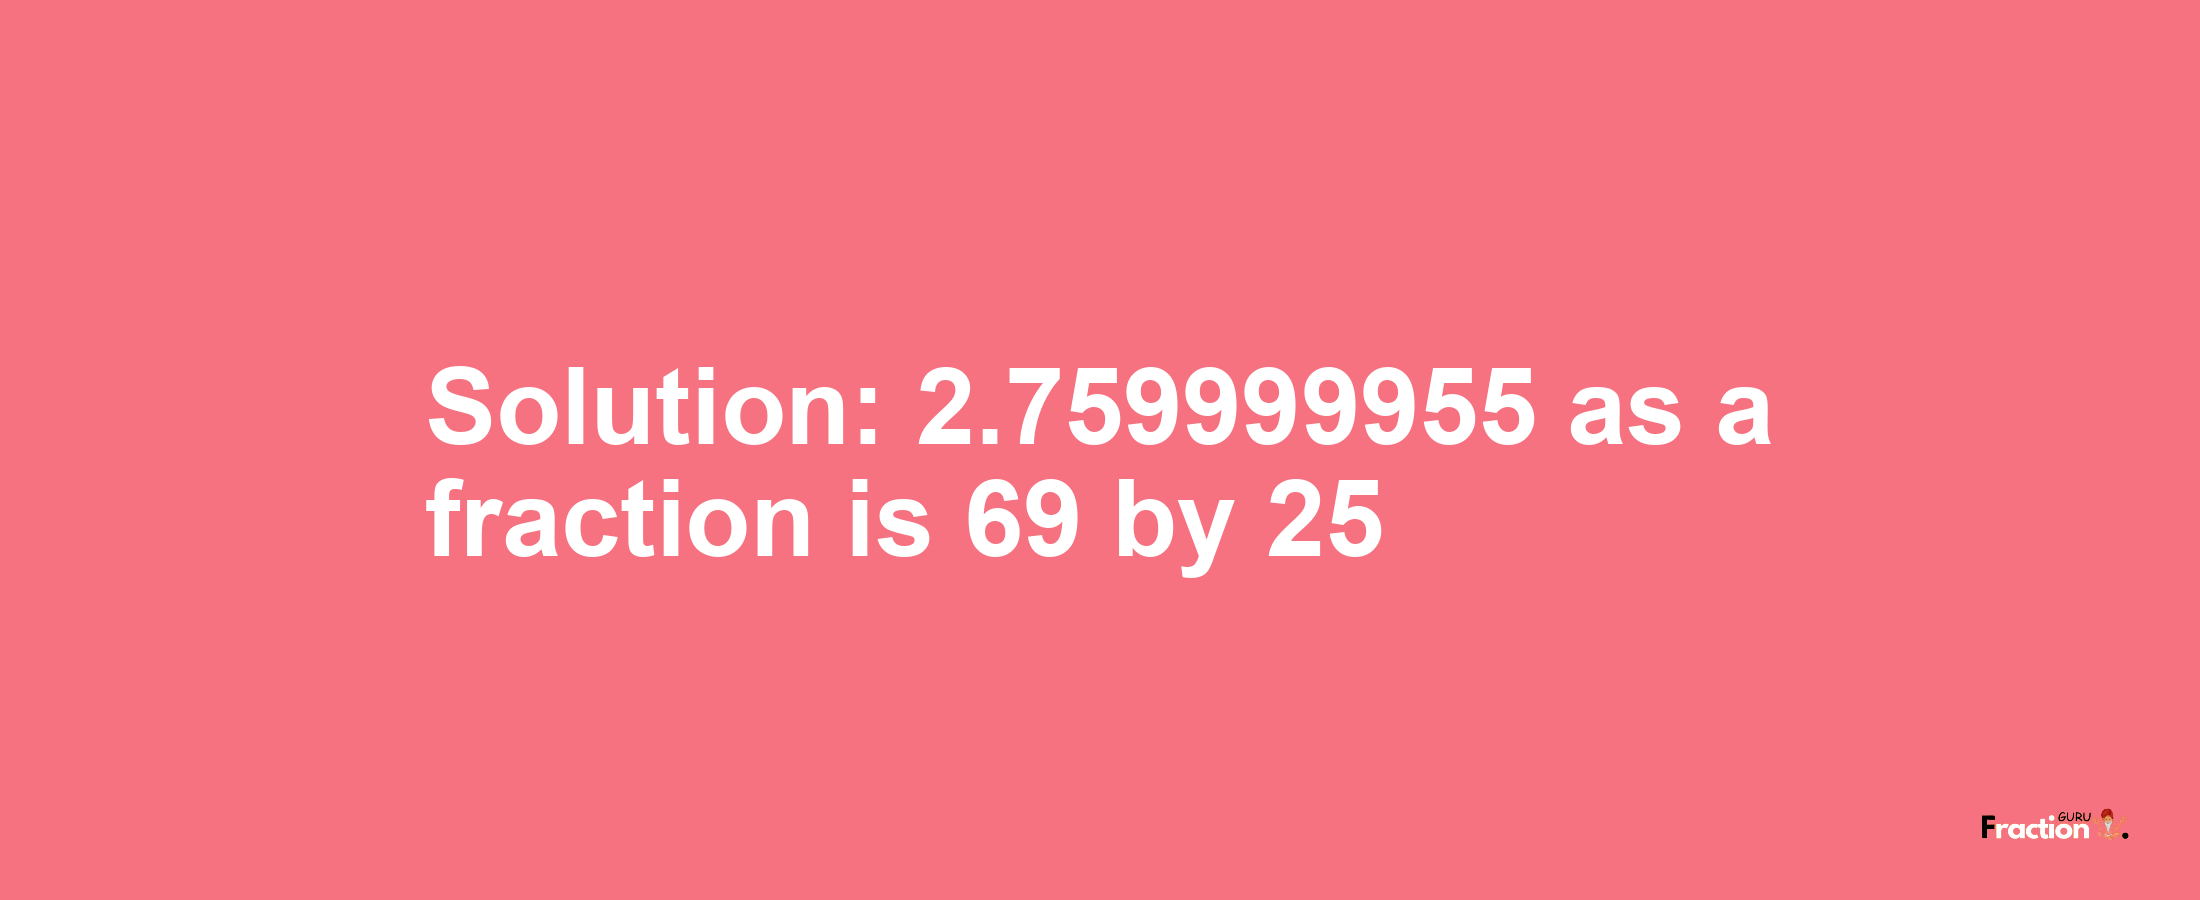 Solution:2.759999955 as a fraction is 69/25